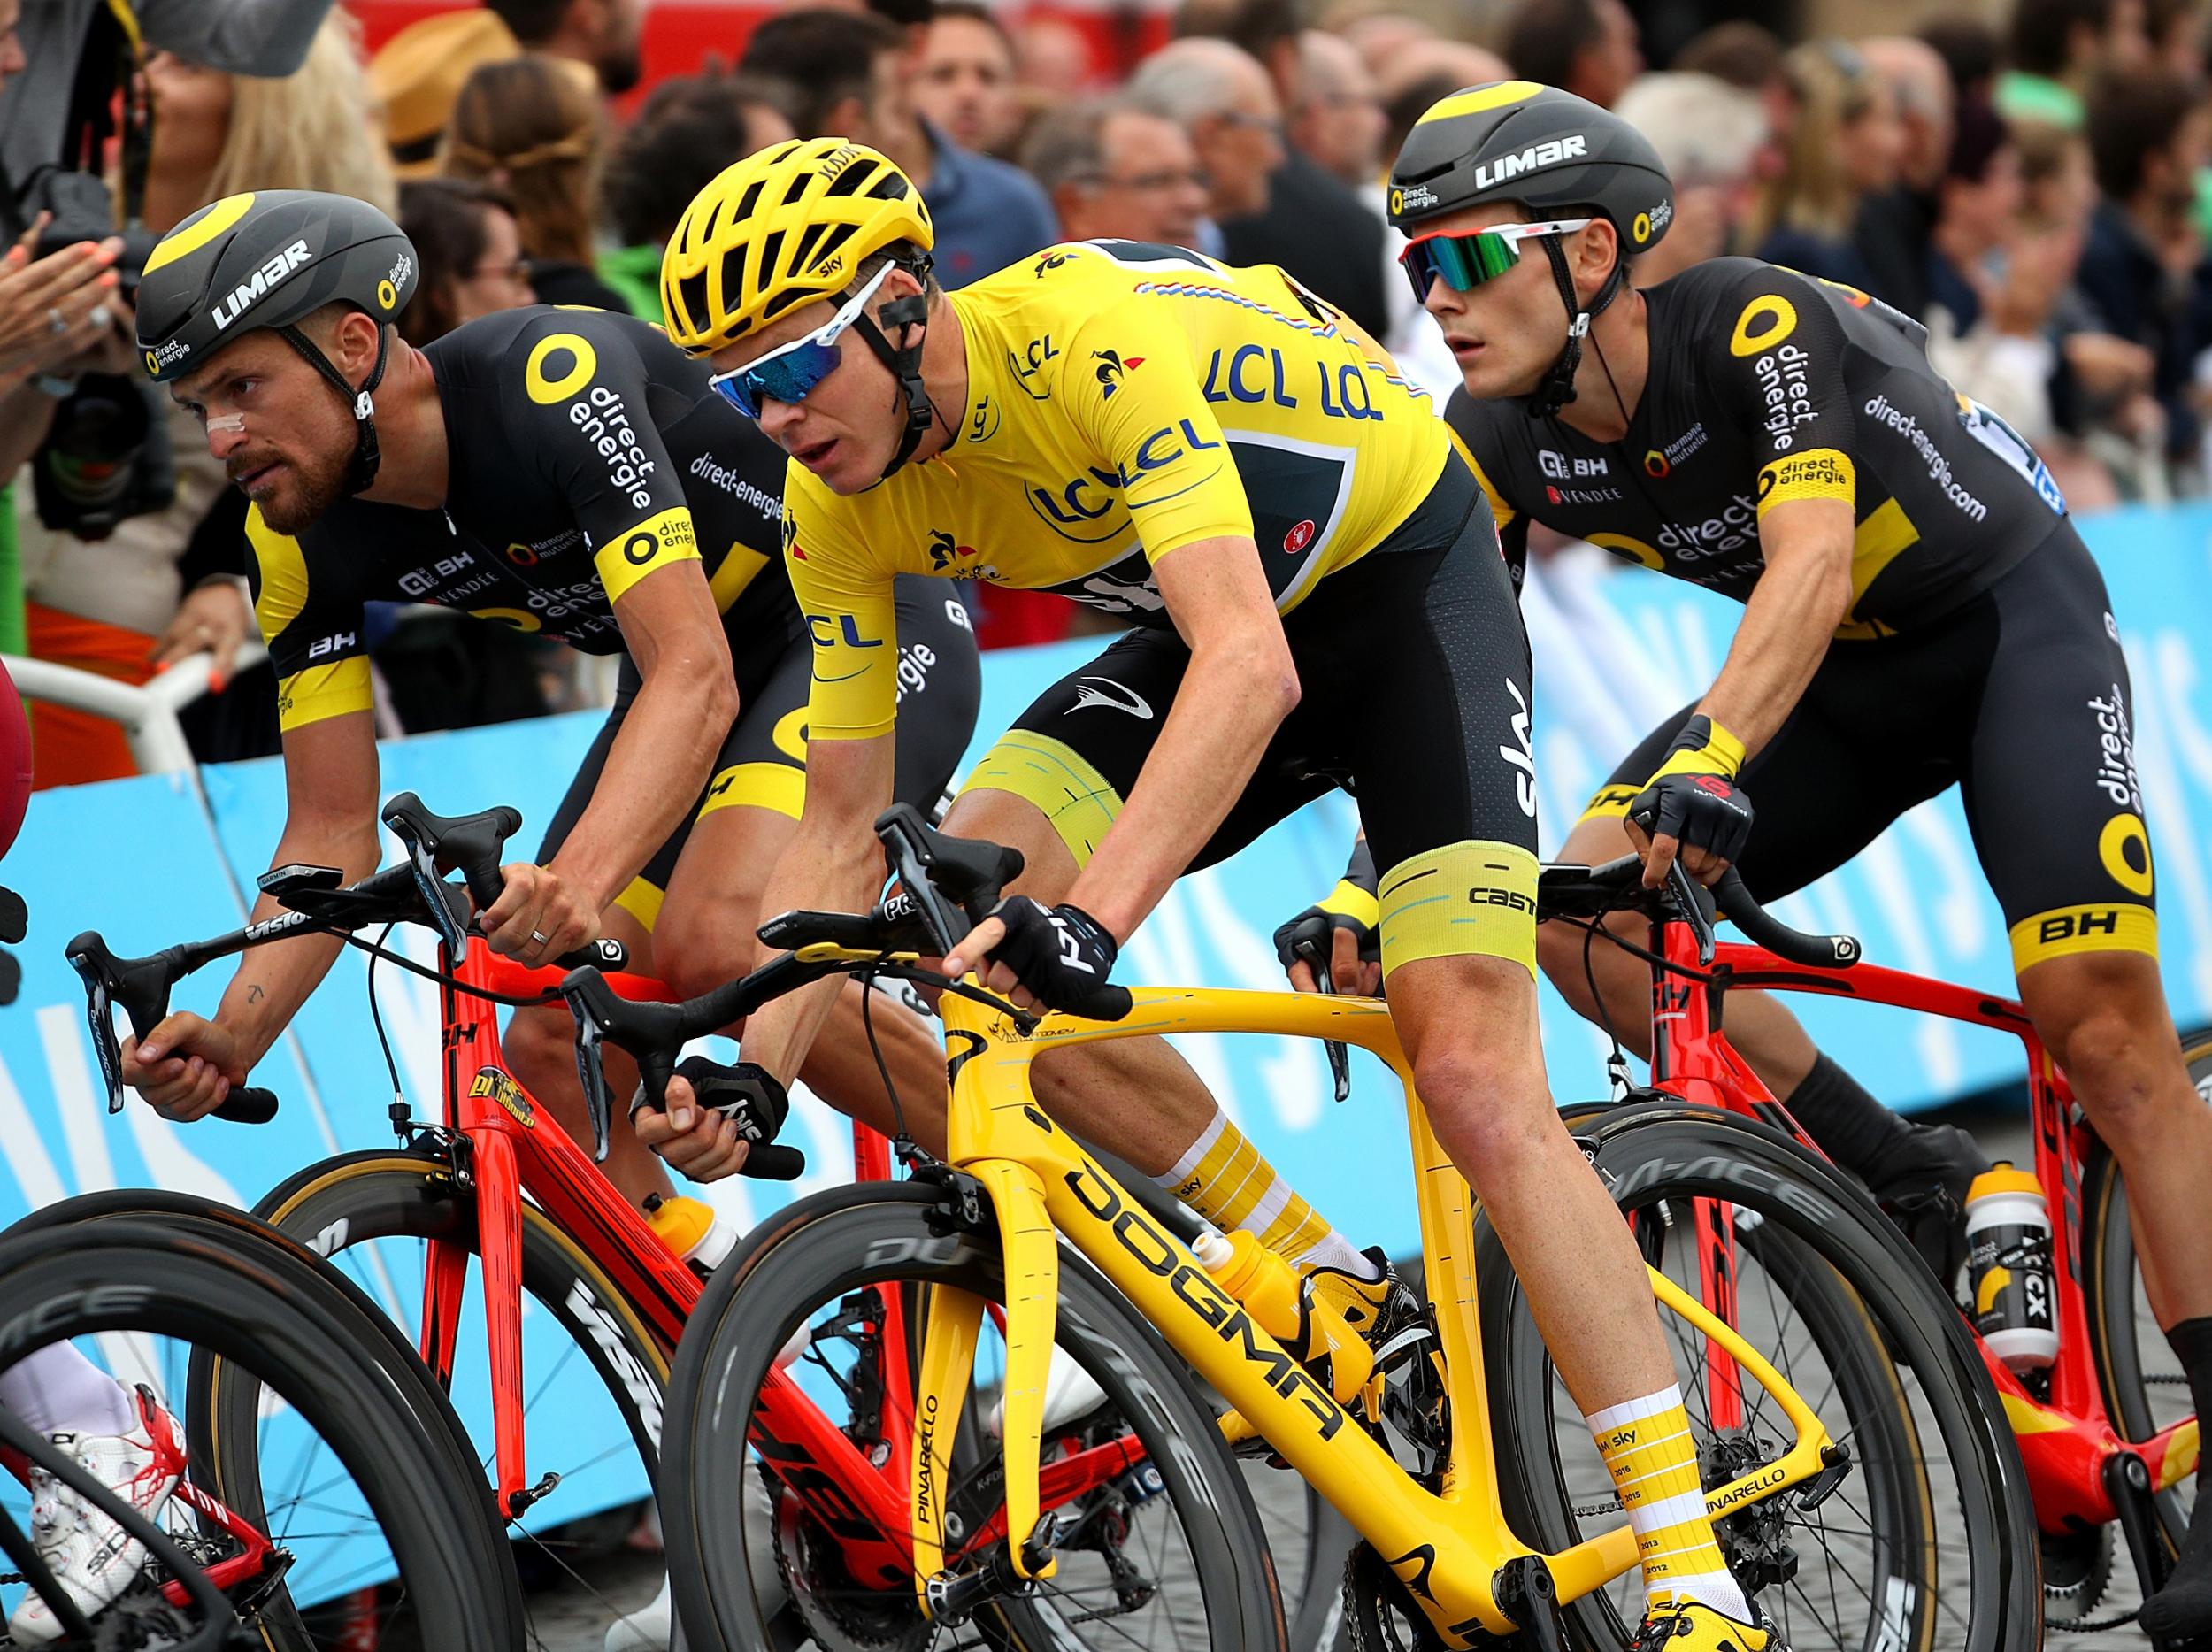 Froome finished the last stage through Paris safely in the pack in 65th position